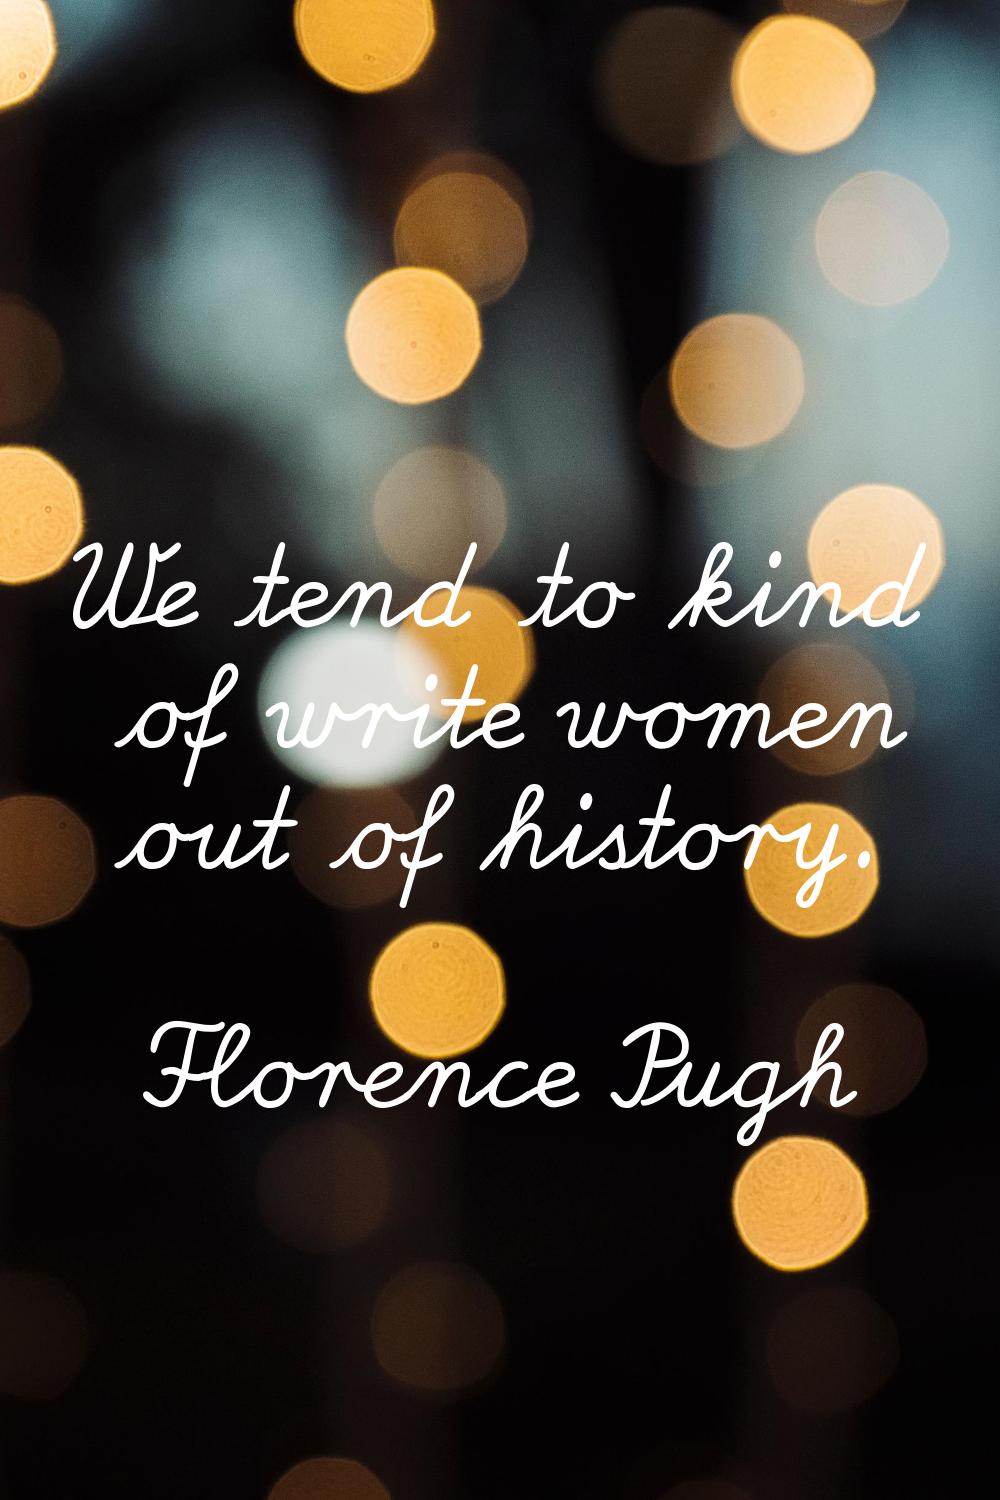 We tend to kind of write women out of history.